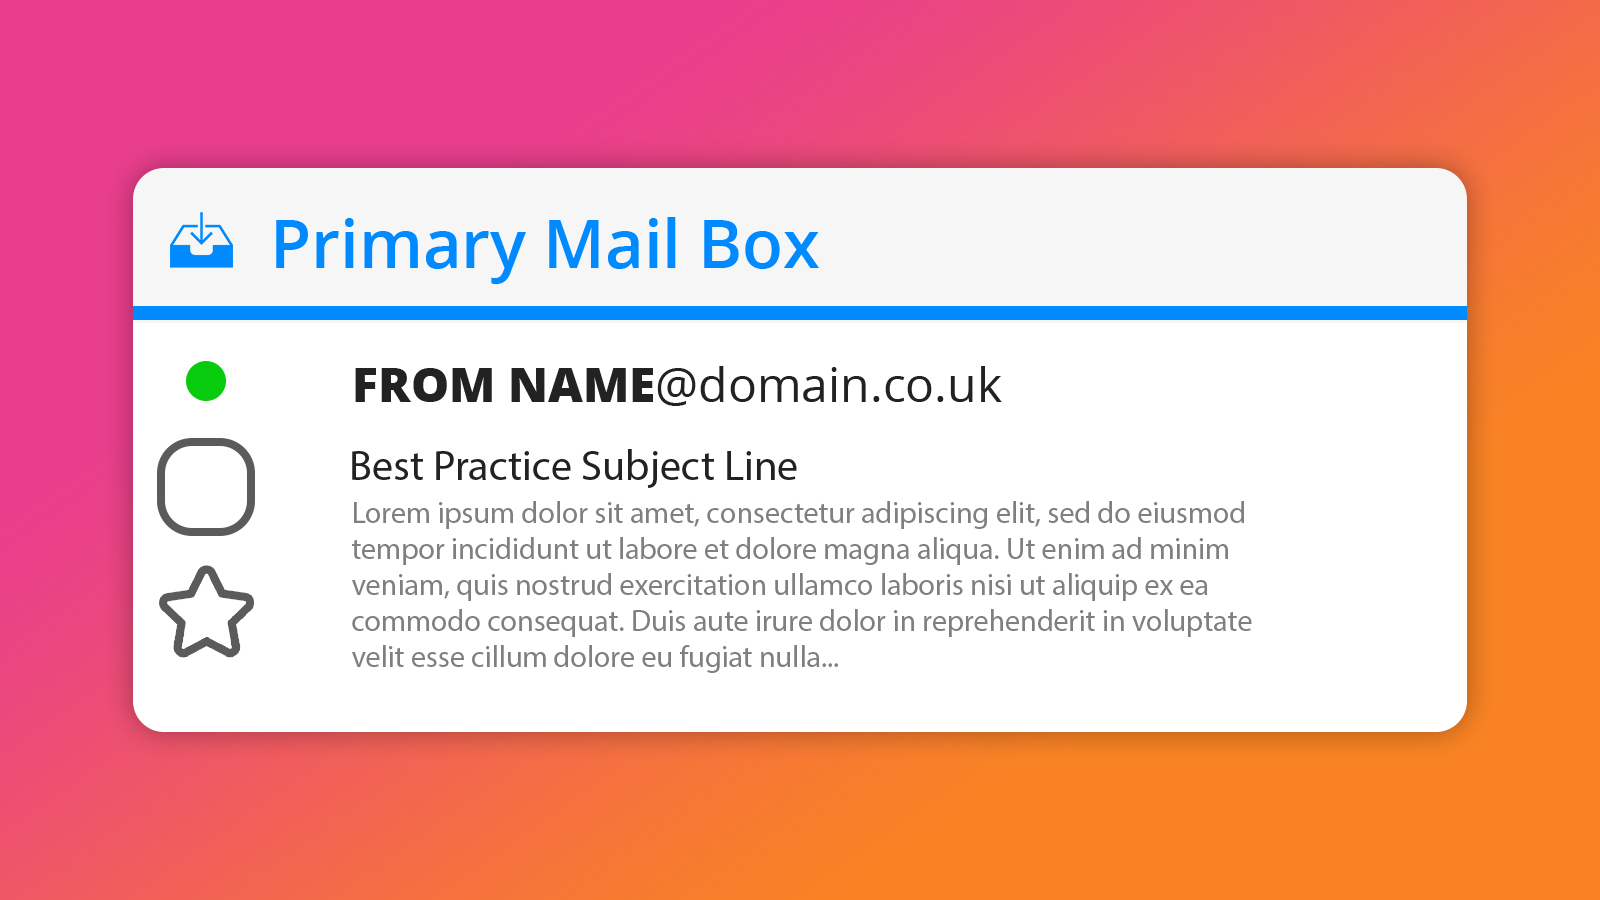 Send Preferences: From name and address